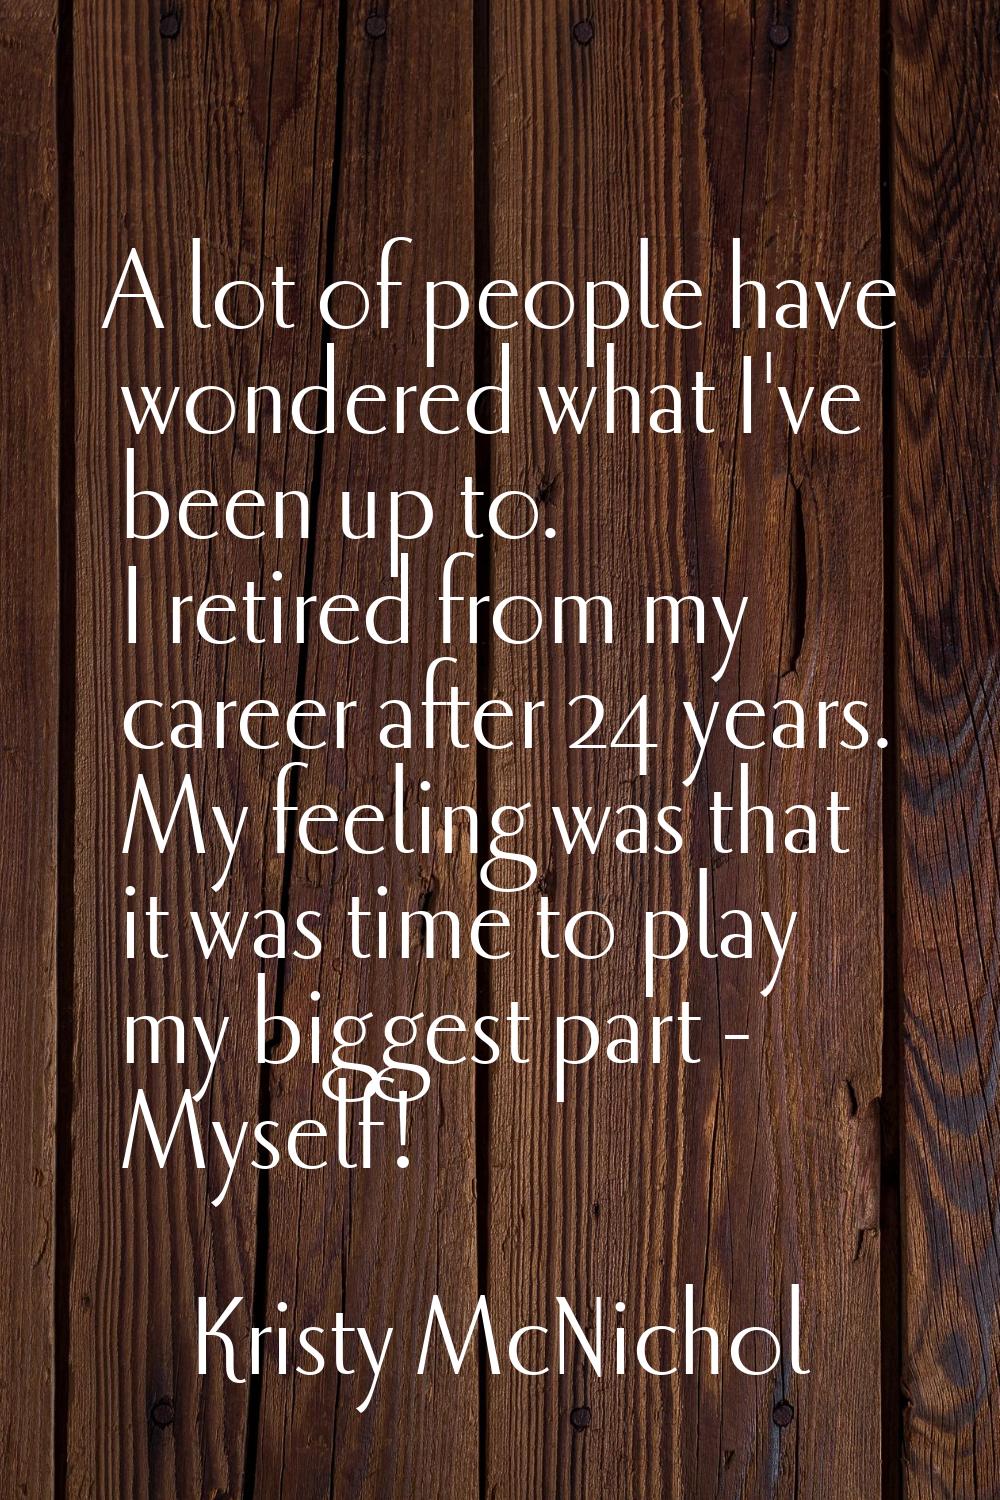 A lot of people have wondered what I've been up to. I retired from my career after 24 years. My fee